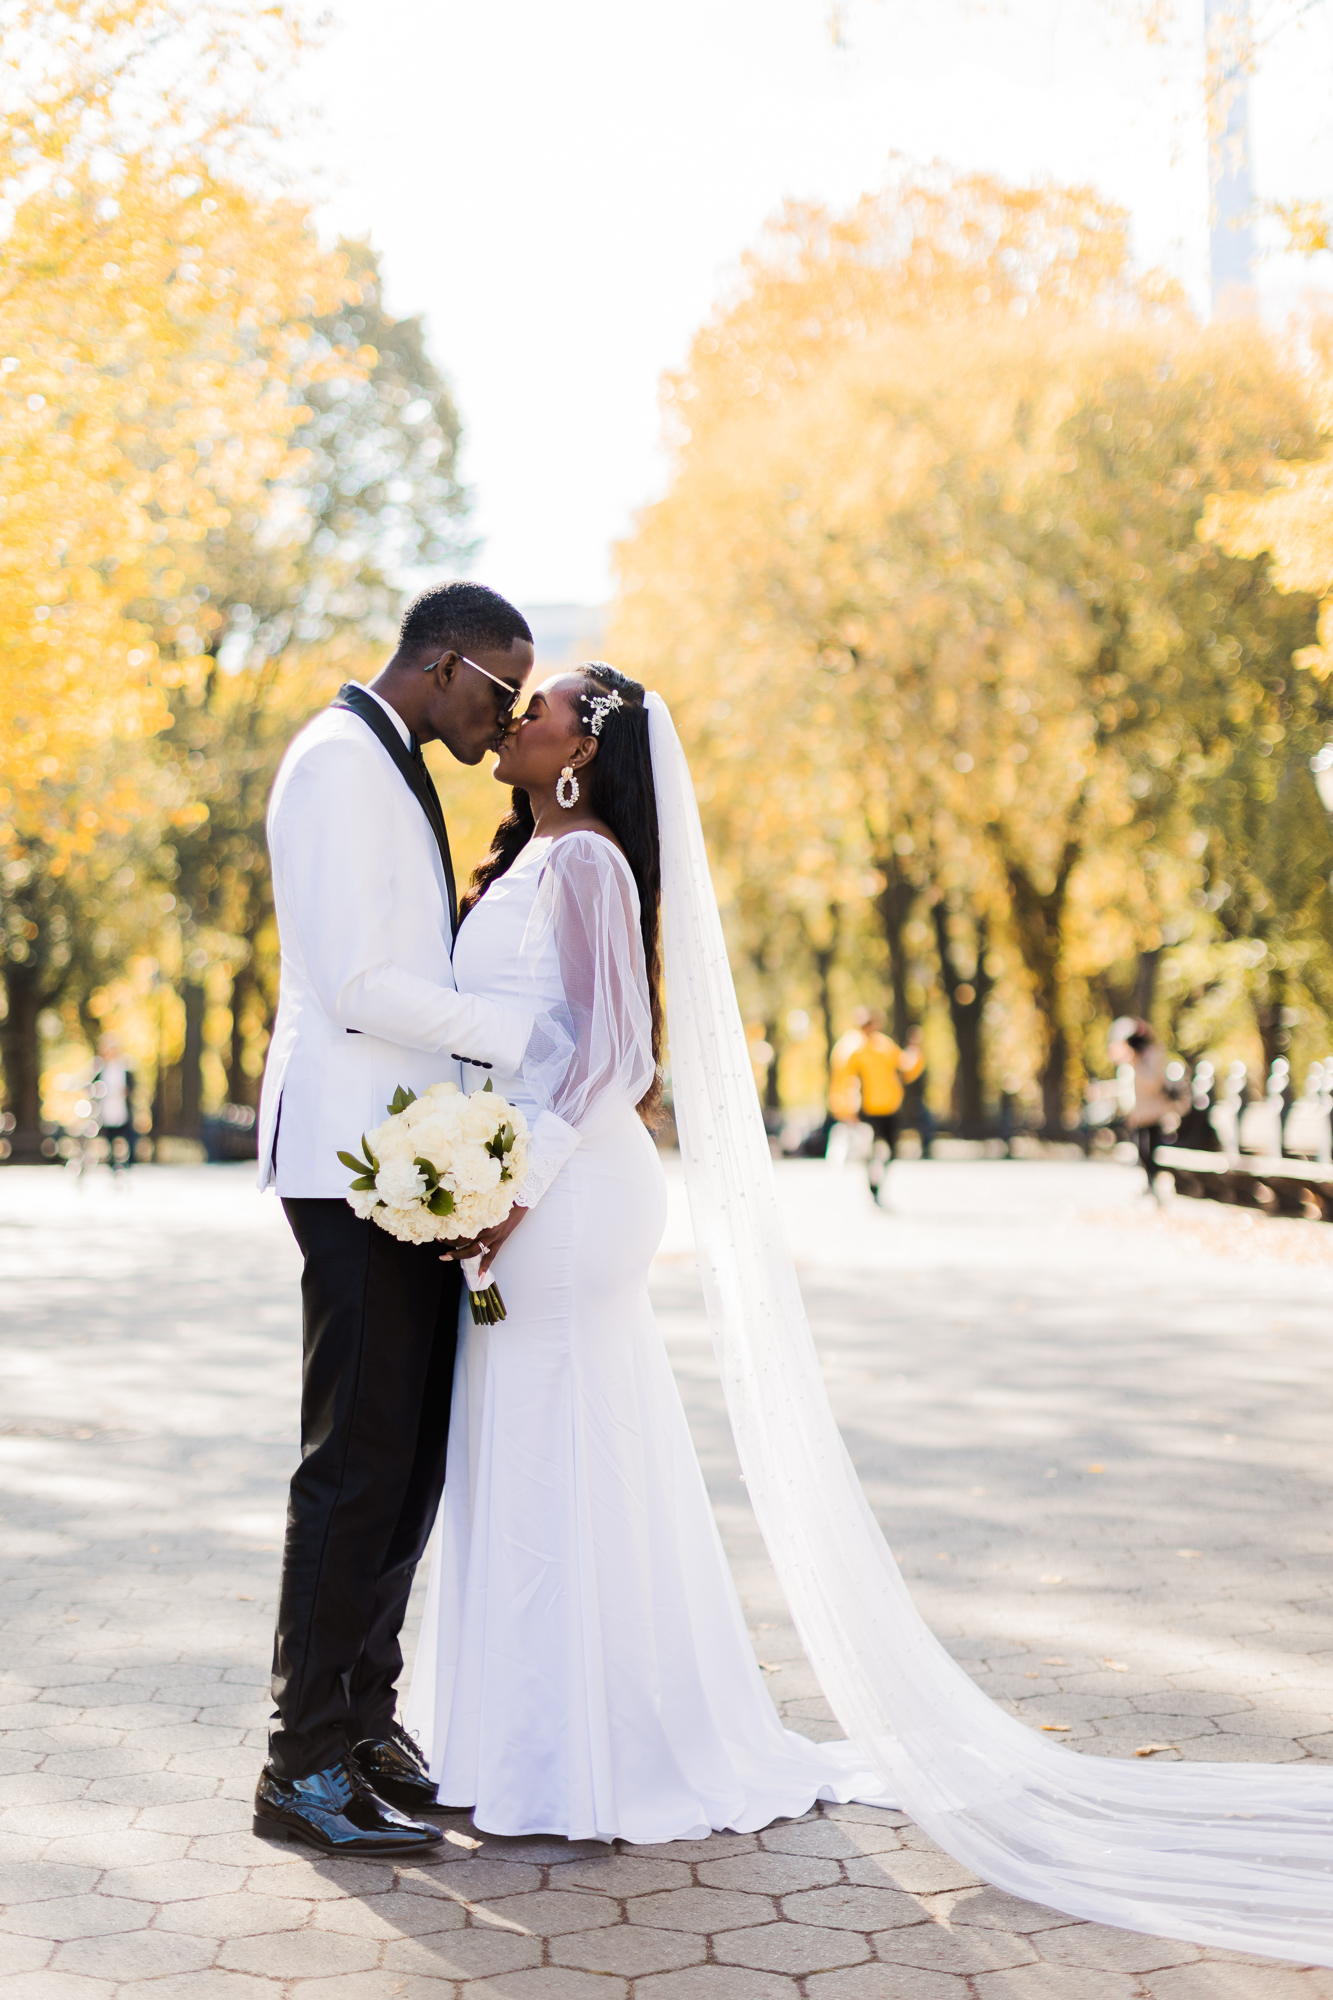 Romantic Central Park Wedding Photos on Cherry Hill in Fall